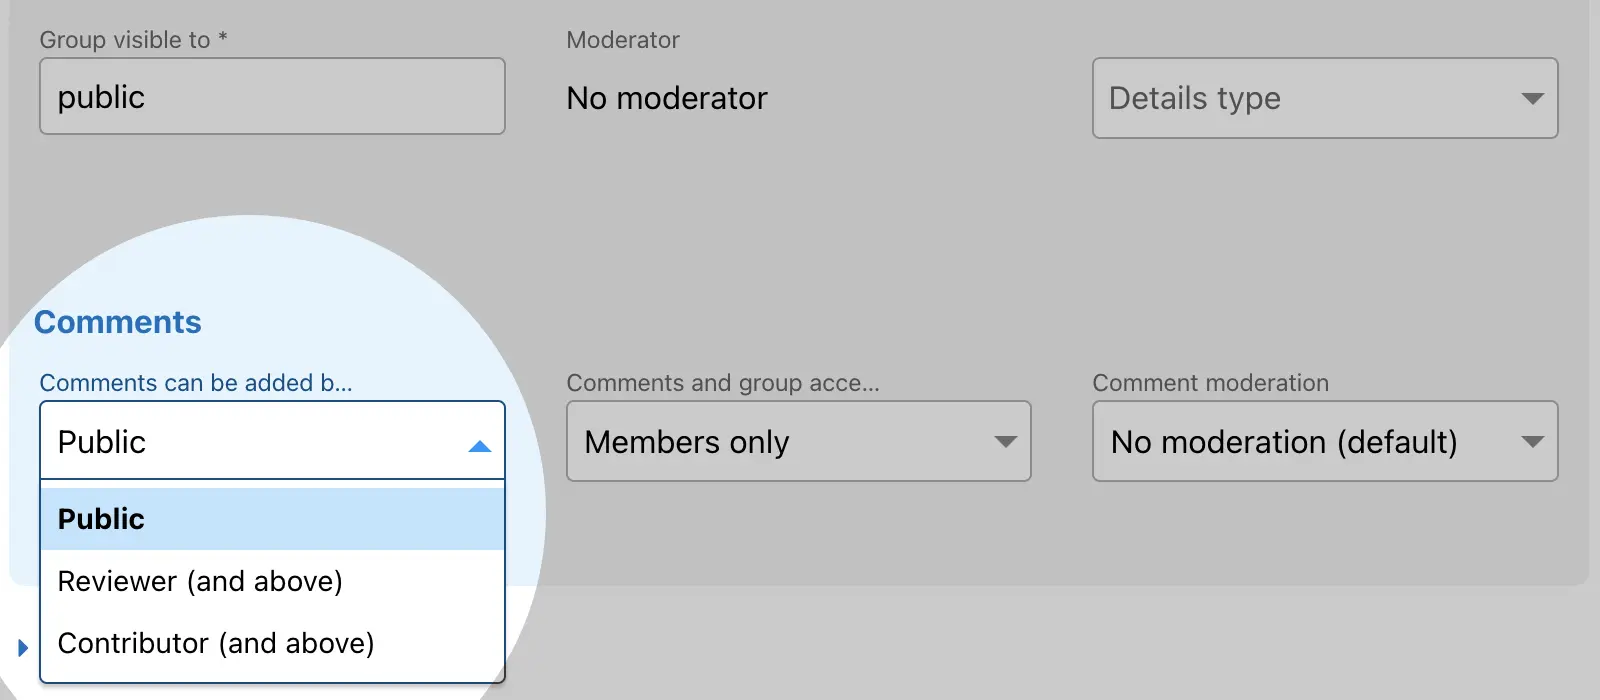 Group configuration – Comments added by public